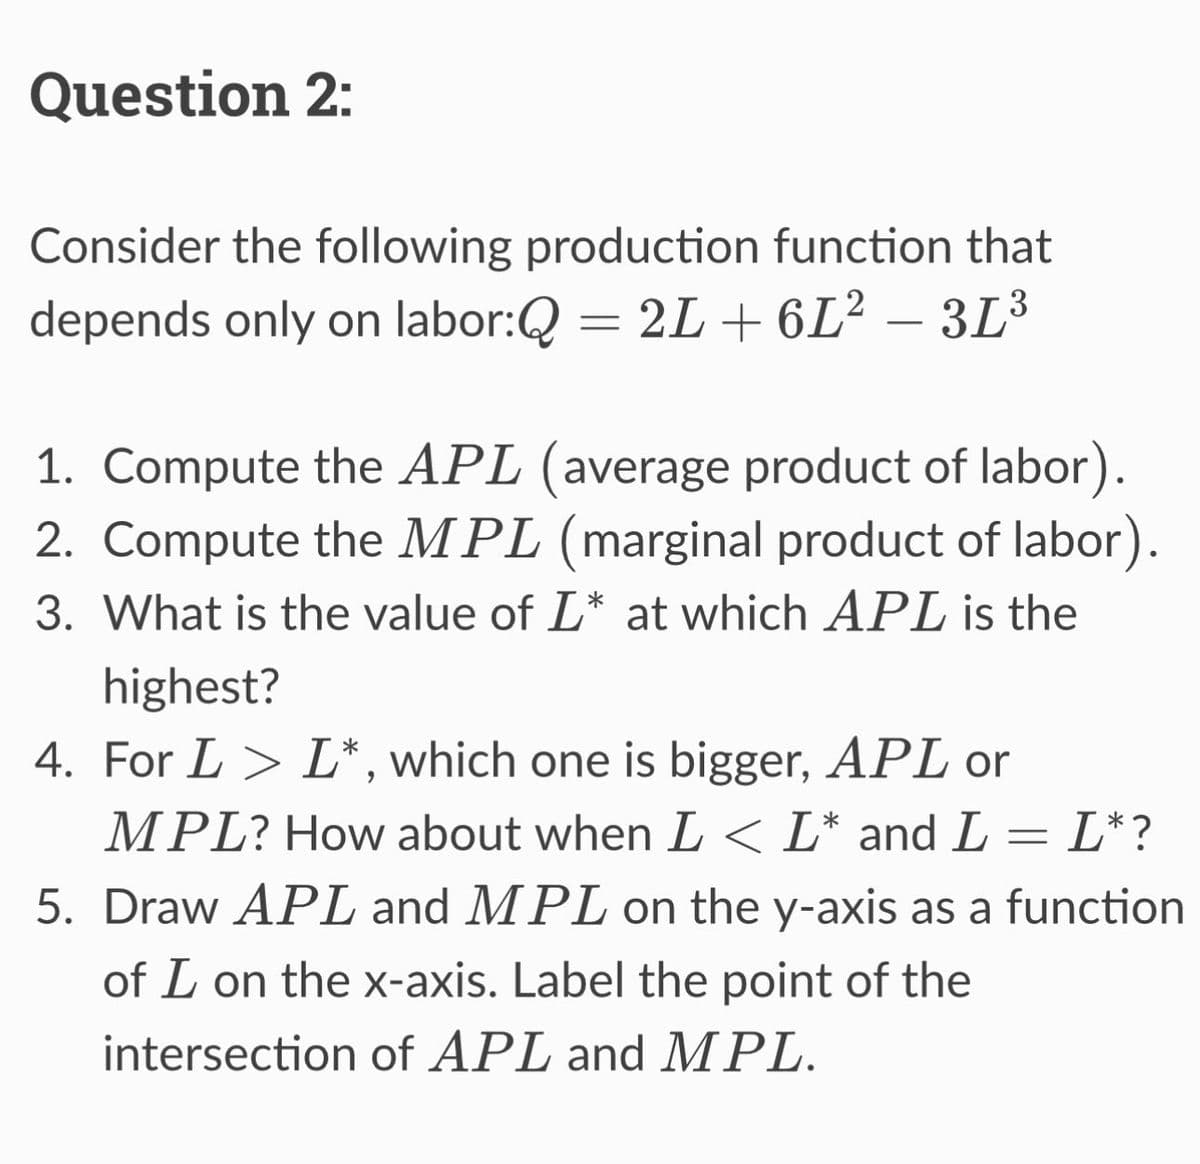 Question 2:
Consider the following production function that
depends only on labor:Q = 2L+6L² - 3L³
1. Compute the APL (average product of labor).
2. Compute the MPL (marginal product of labor).
3. What is the value of L* at which APL is the
highest?
4. For L > L*, which one is bigger, APL or
MPL? How about when I < L* and L = L* ?
5. Draw APL and MPL on the y-axis as a function
of L on the x-axis. Label the point of the
intersection of APL and MPL.